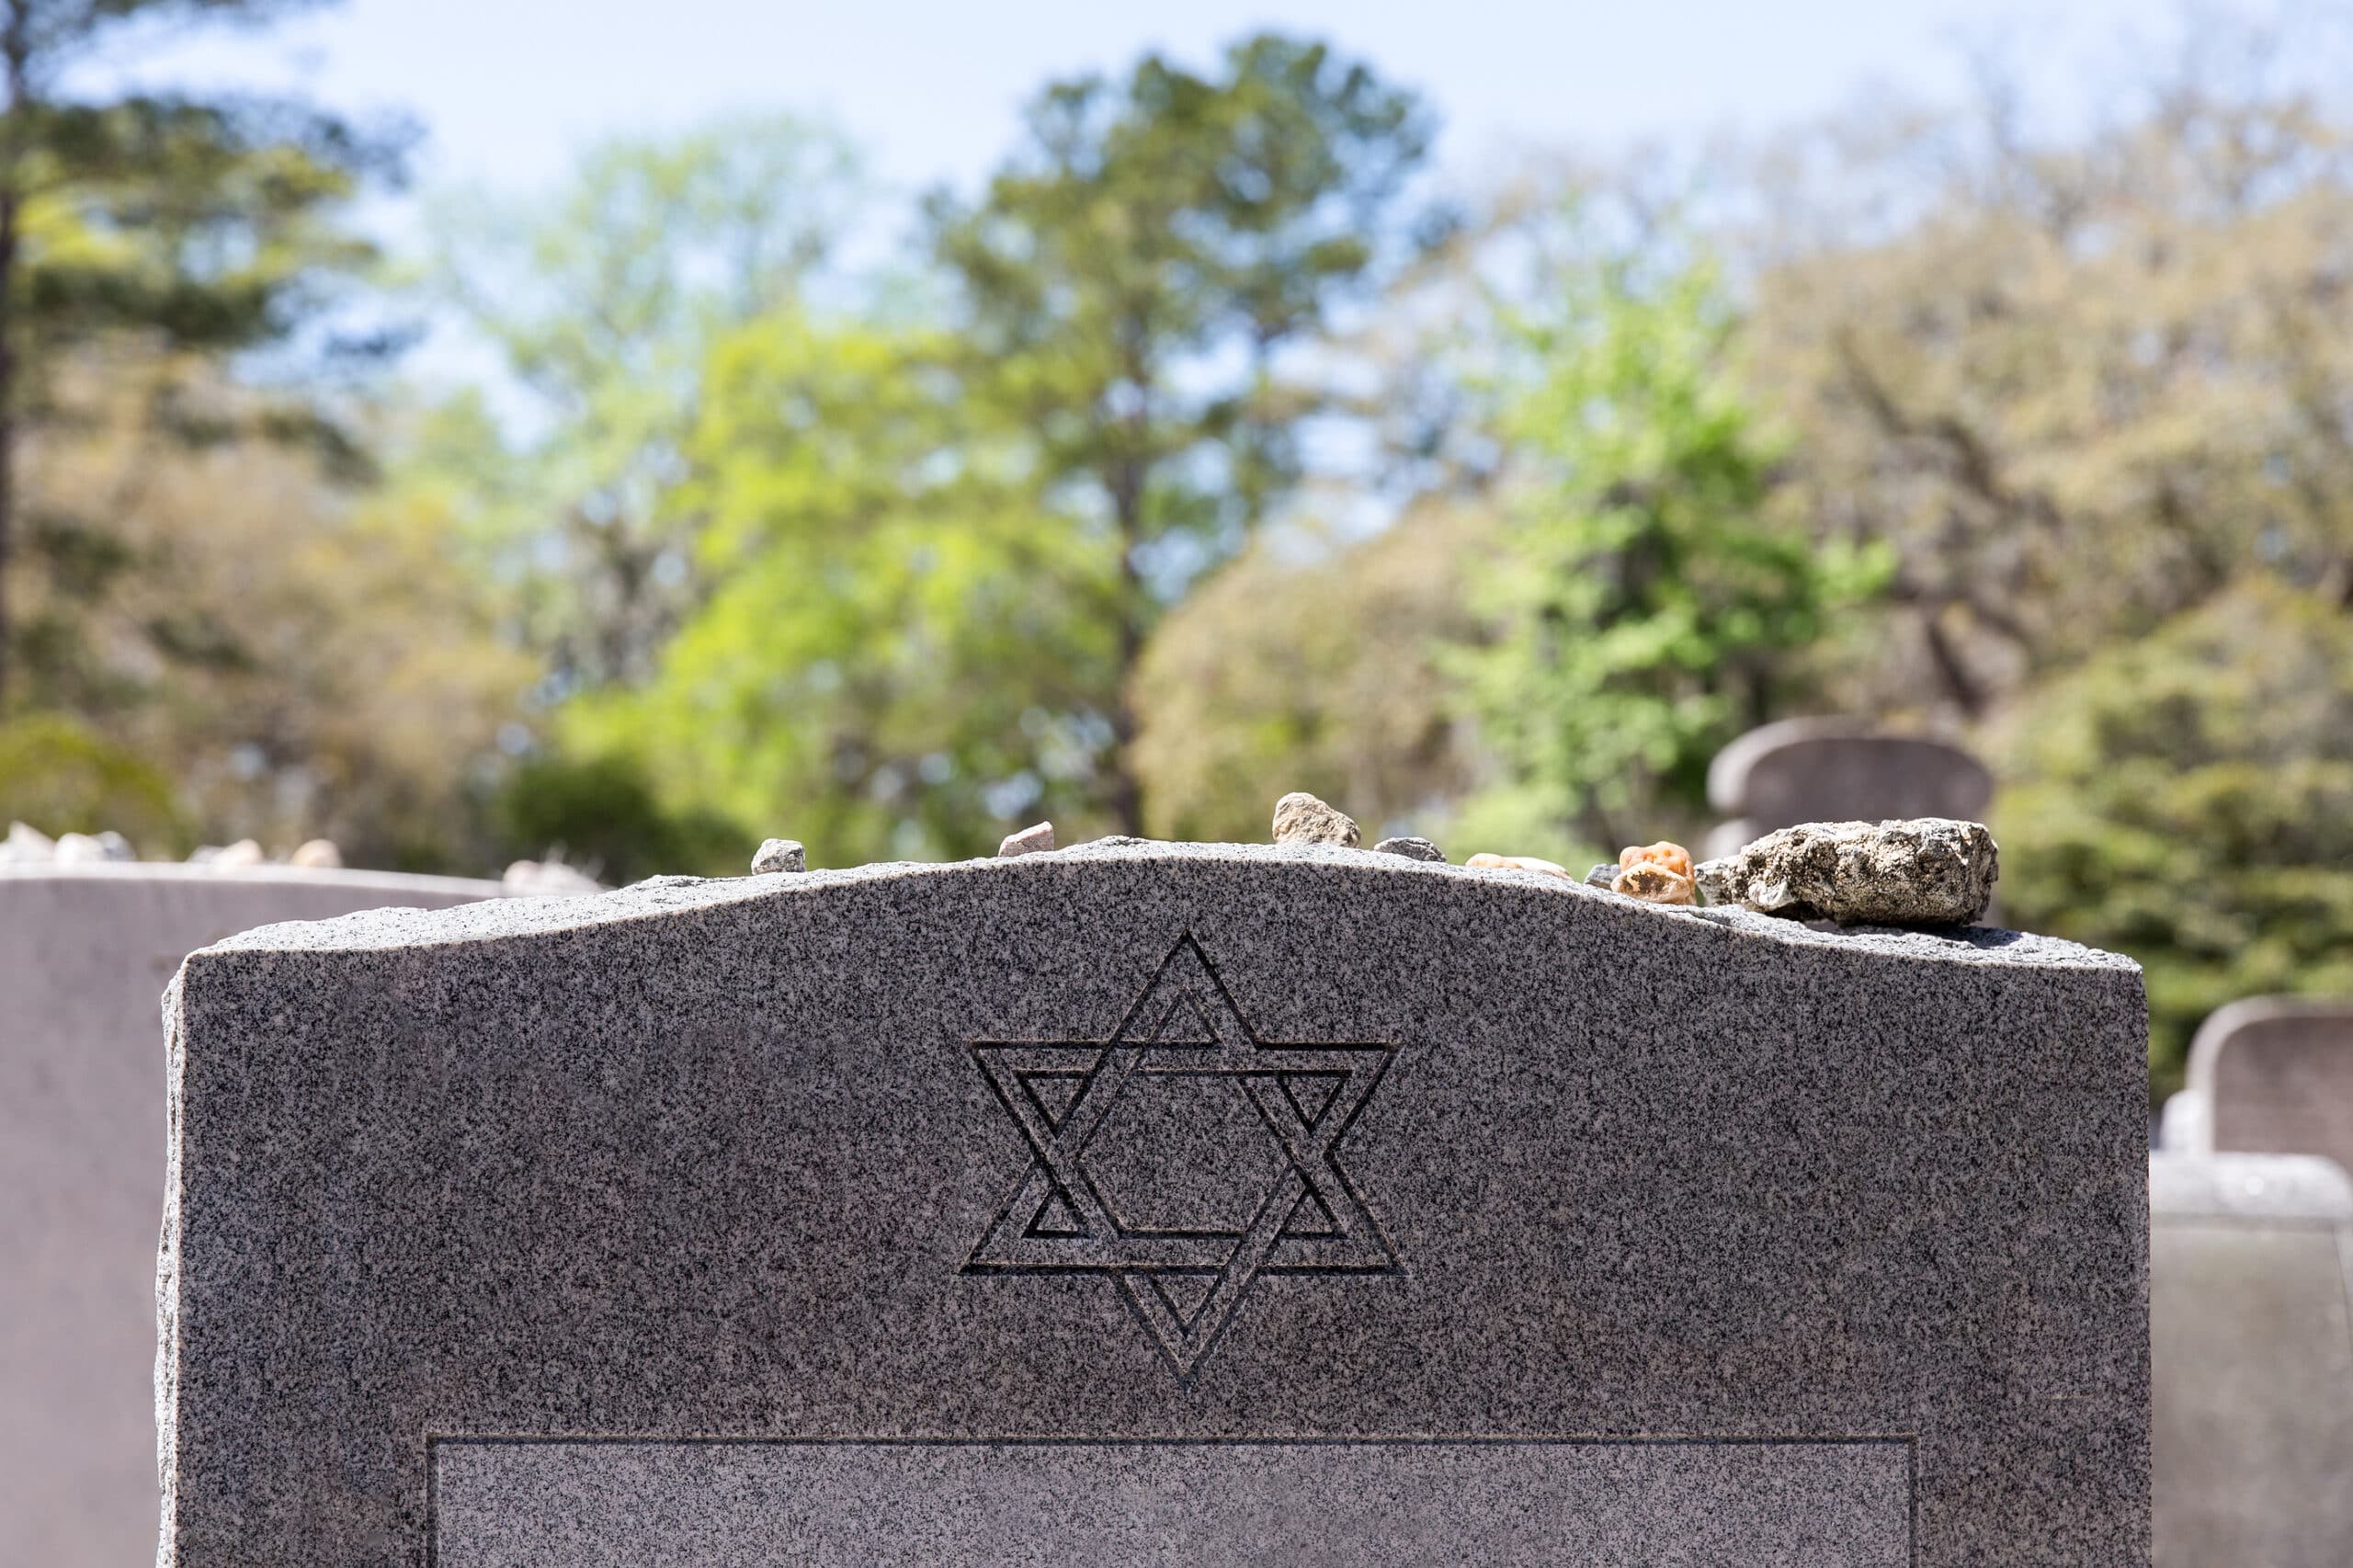 Headstone in a Jewish cemetery with Star of David and memory stones. Selective focus on the foreground.